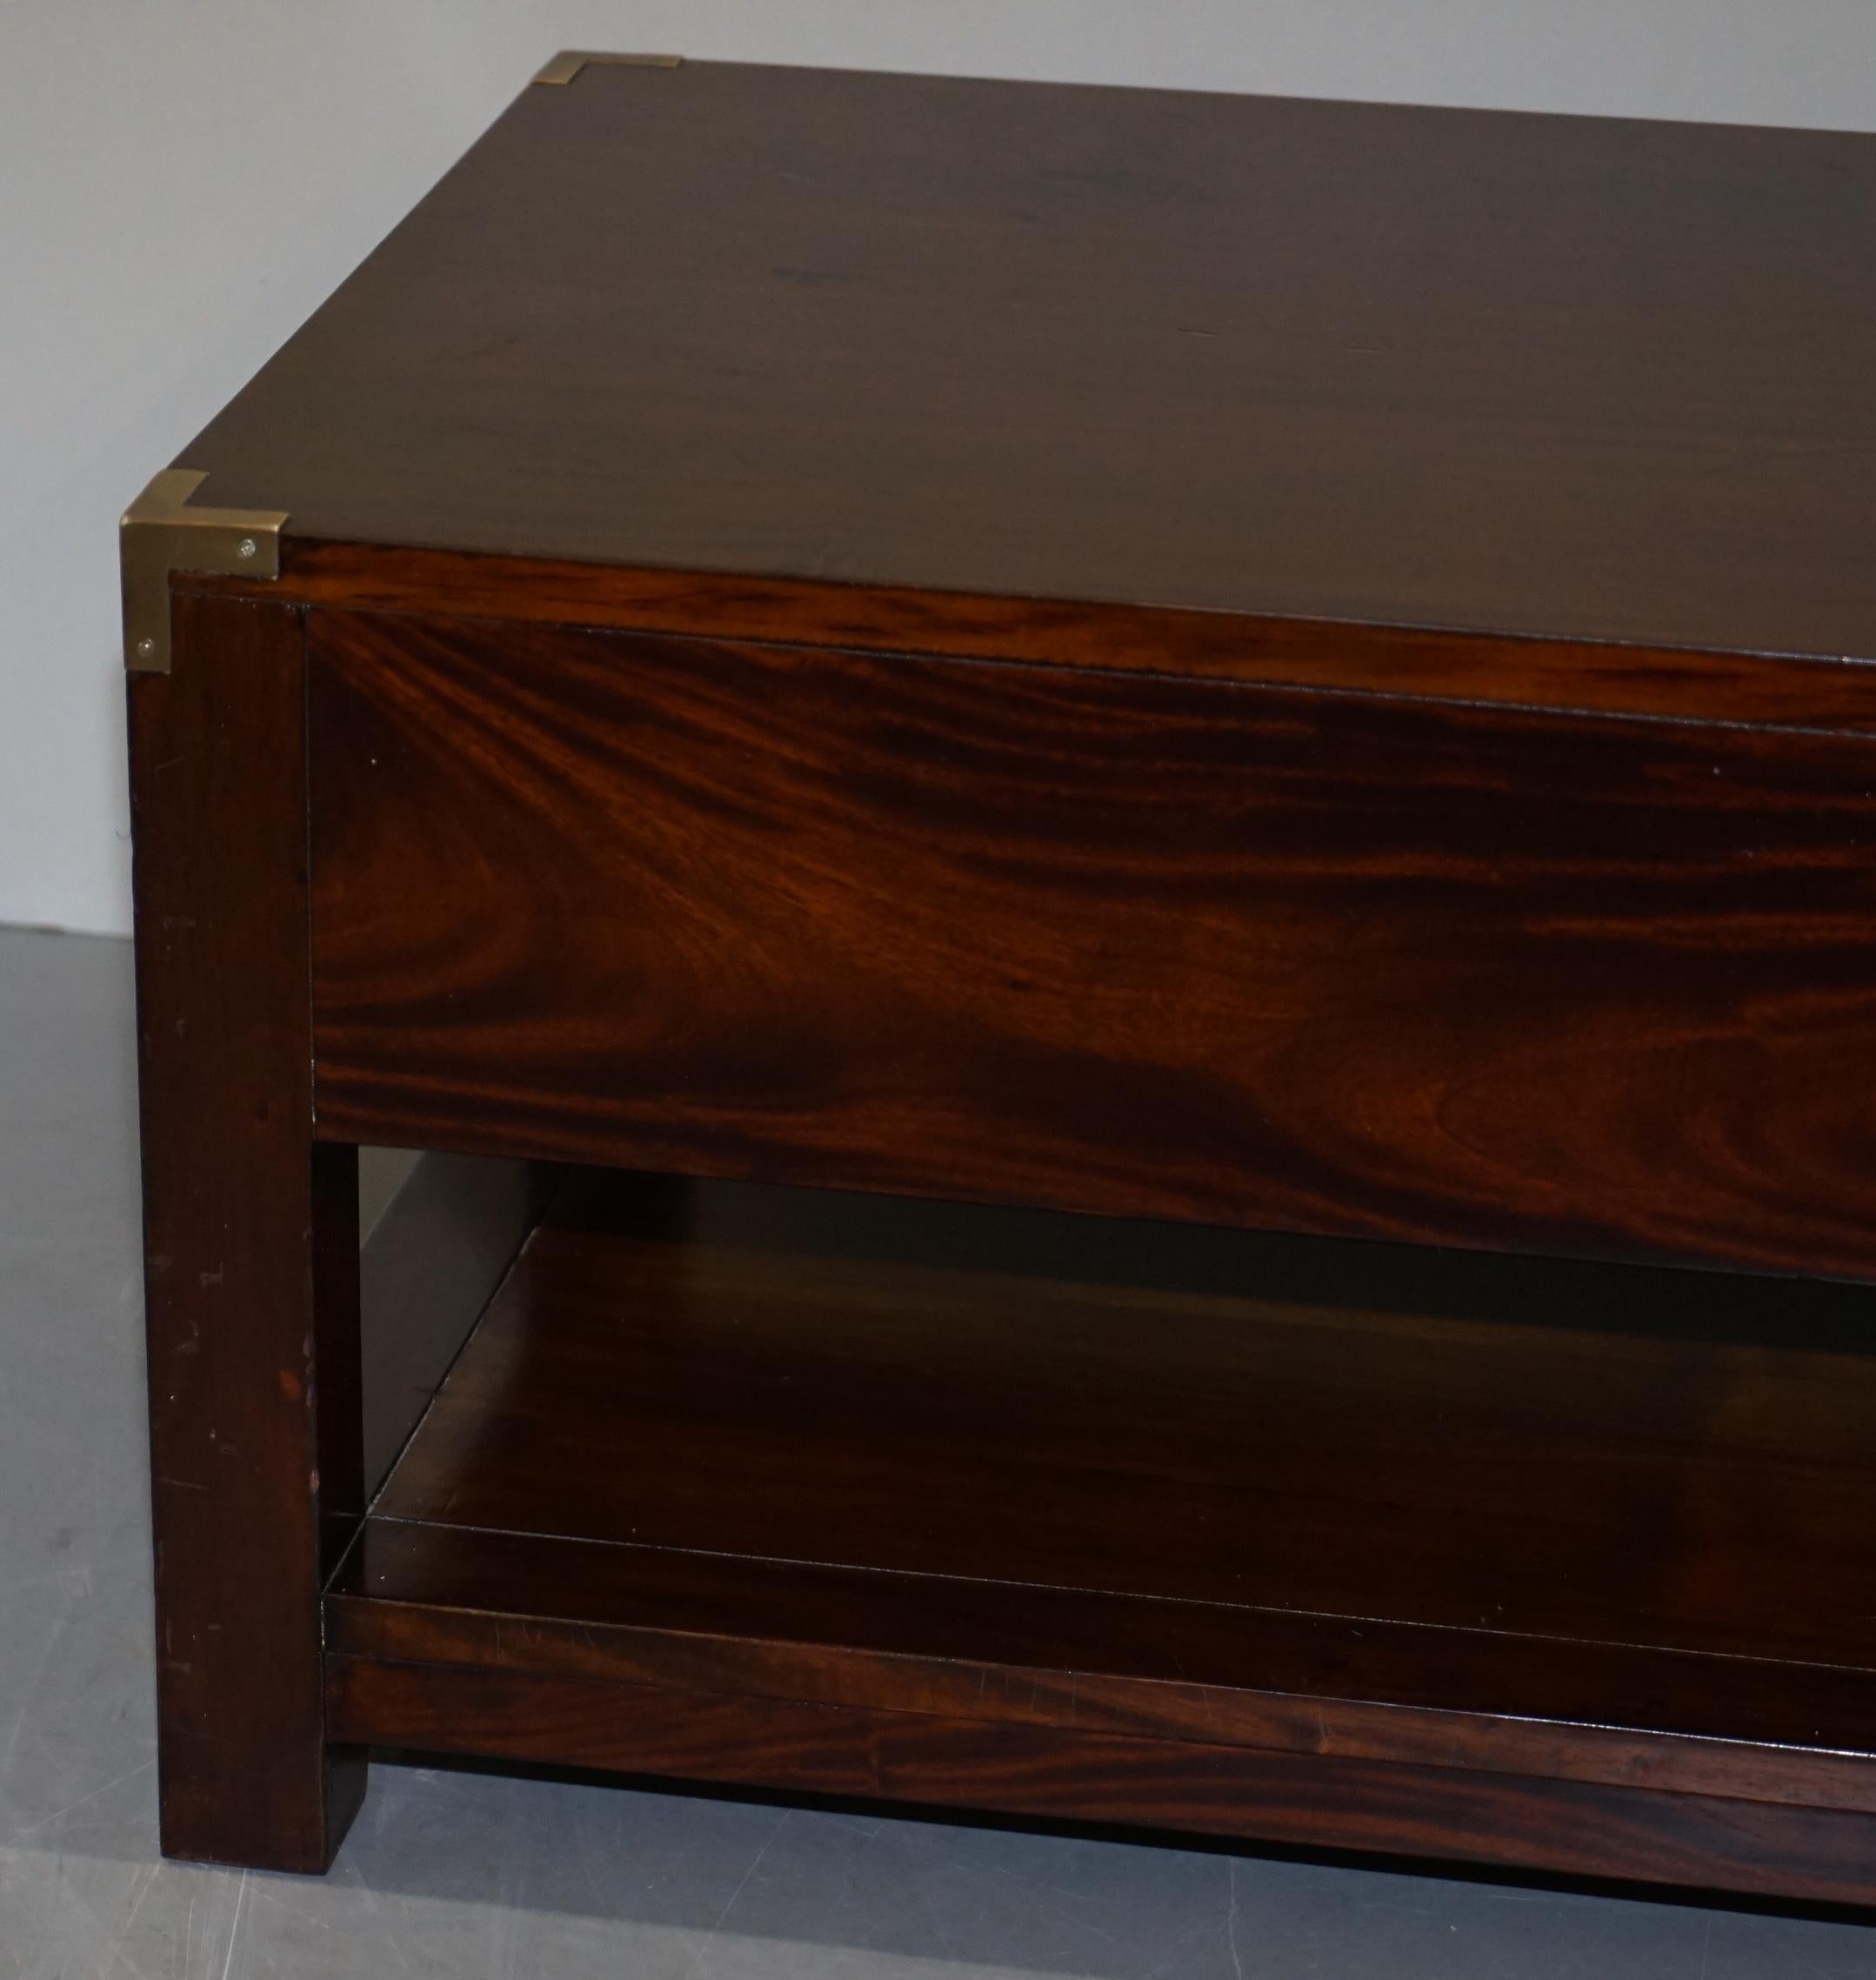 Substantial Military Campaign Style Hardwood and Brass Coffee Table with Drawers For Sale 4